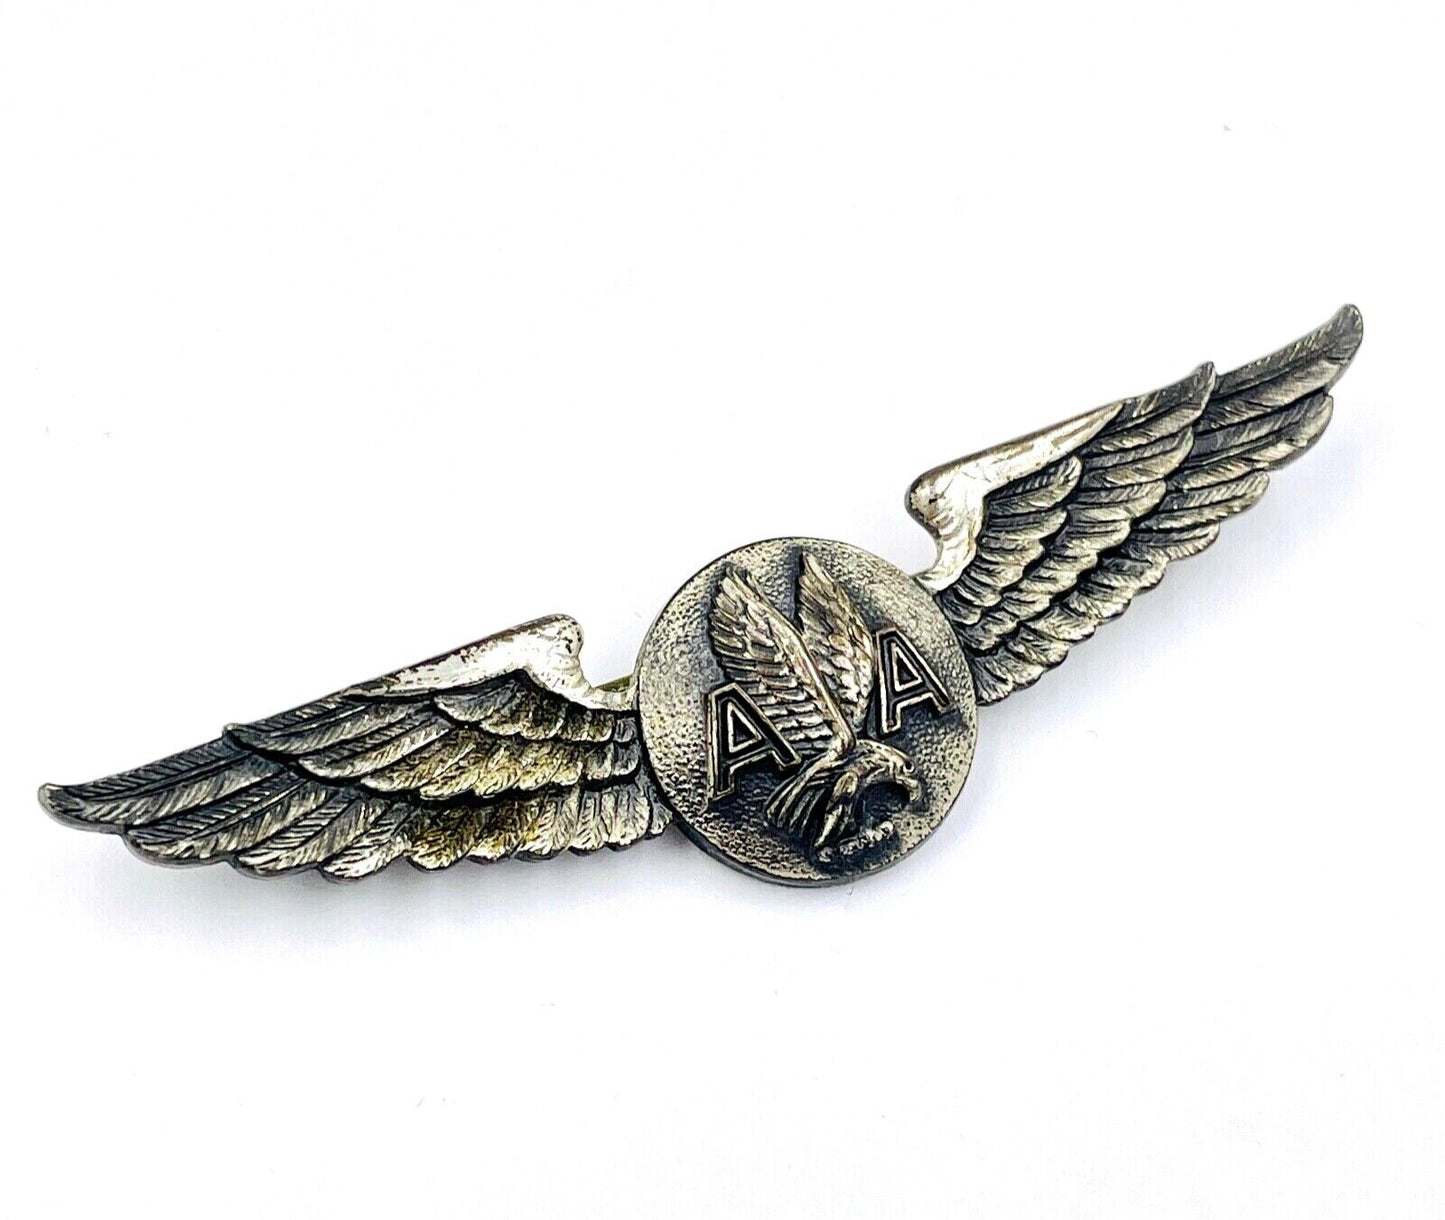 American Airlines Sterling Silver Flight Attendant Wings Pin Vintage